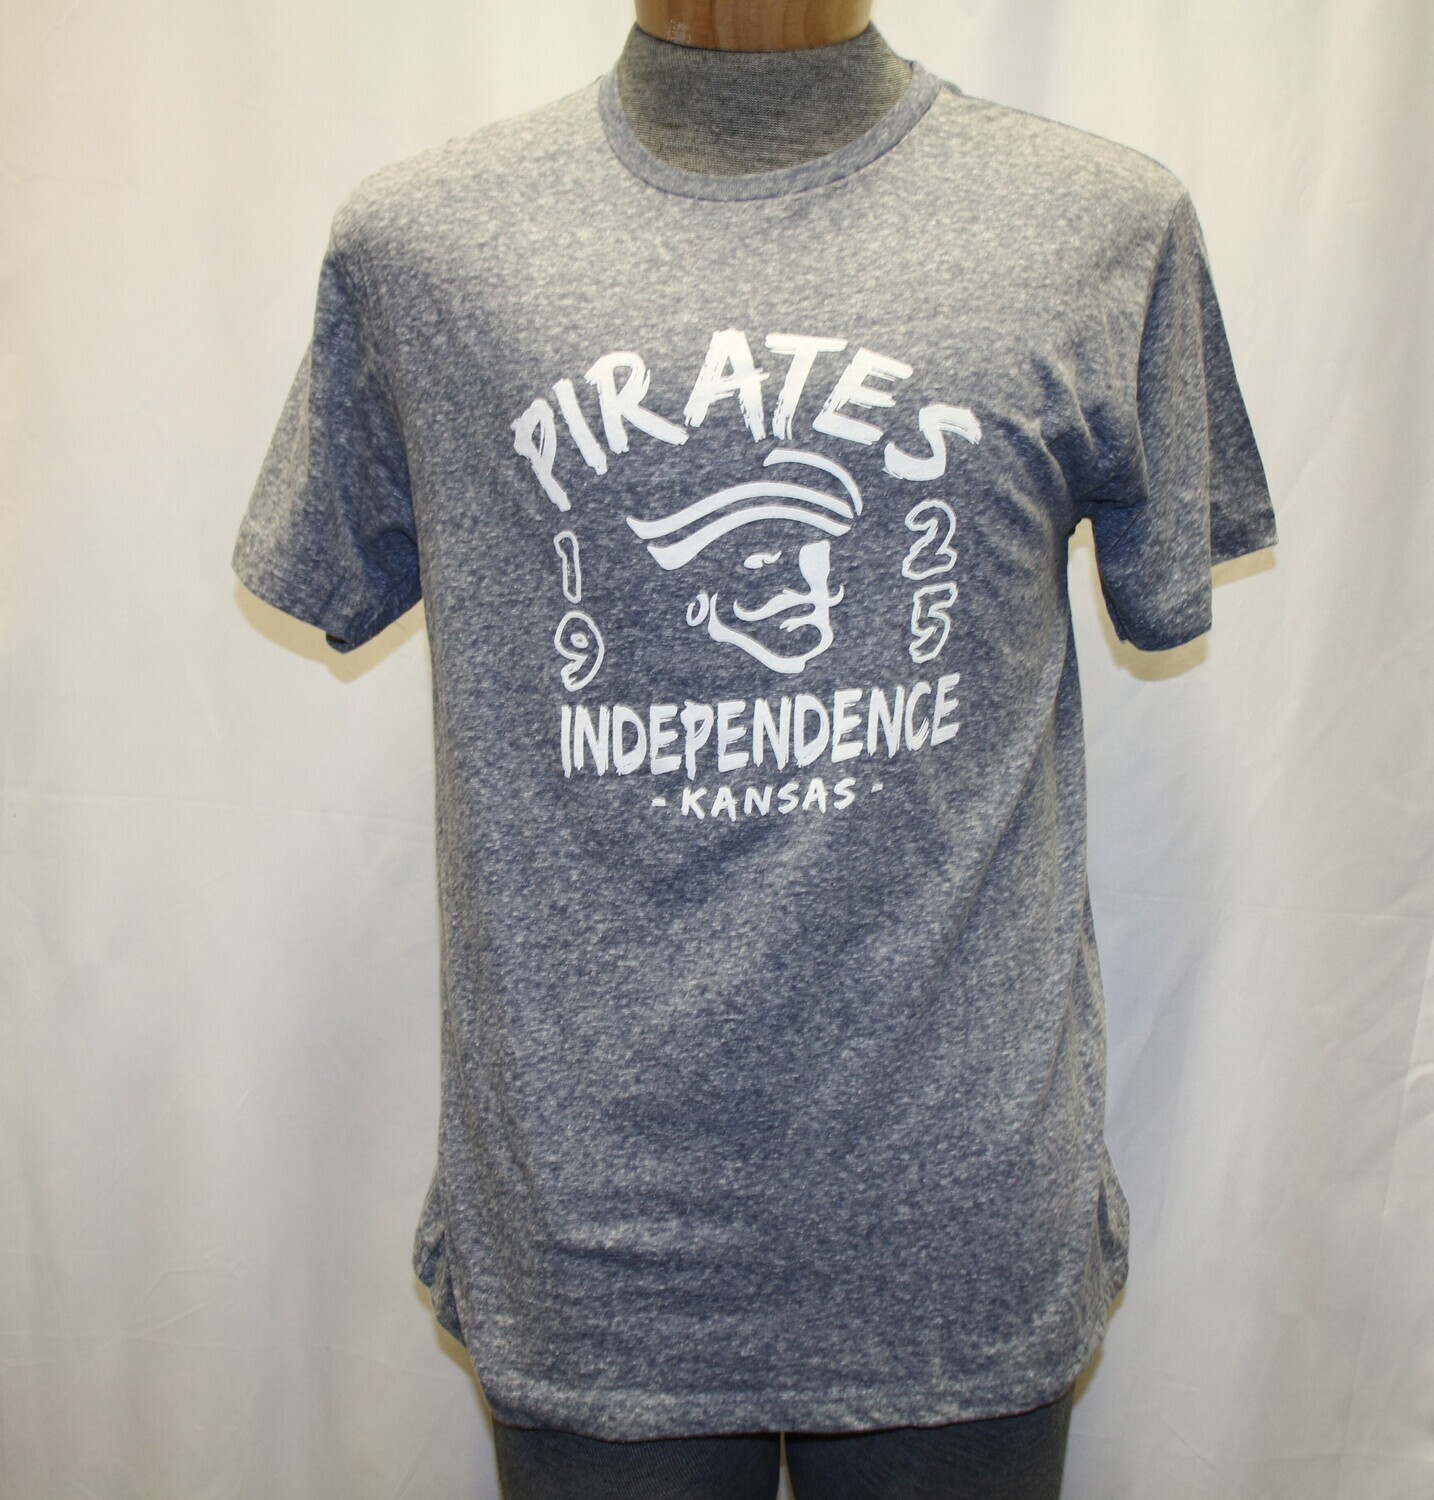 Snow Heather Navy Short Sleeved TShirt with PIRATES INDEPENDENCE 1925, Size: XXXLarge